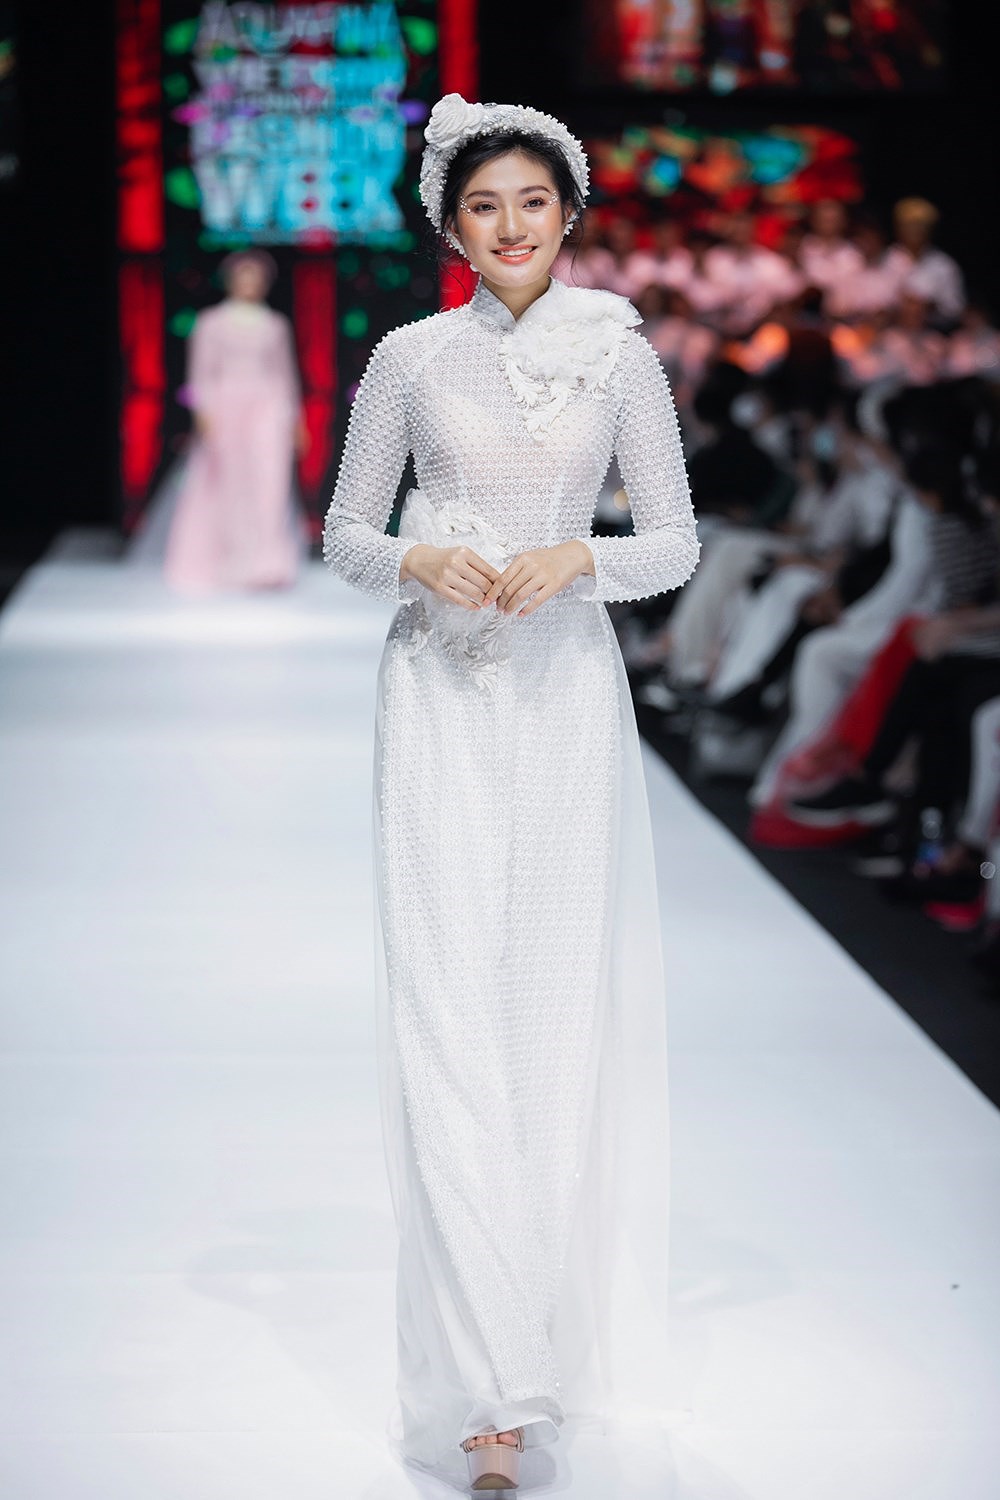 Kim Lang - une collection d'ao dai brodee a la main delicate et impressionnante hinh anh 6